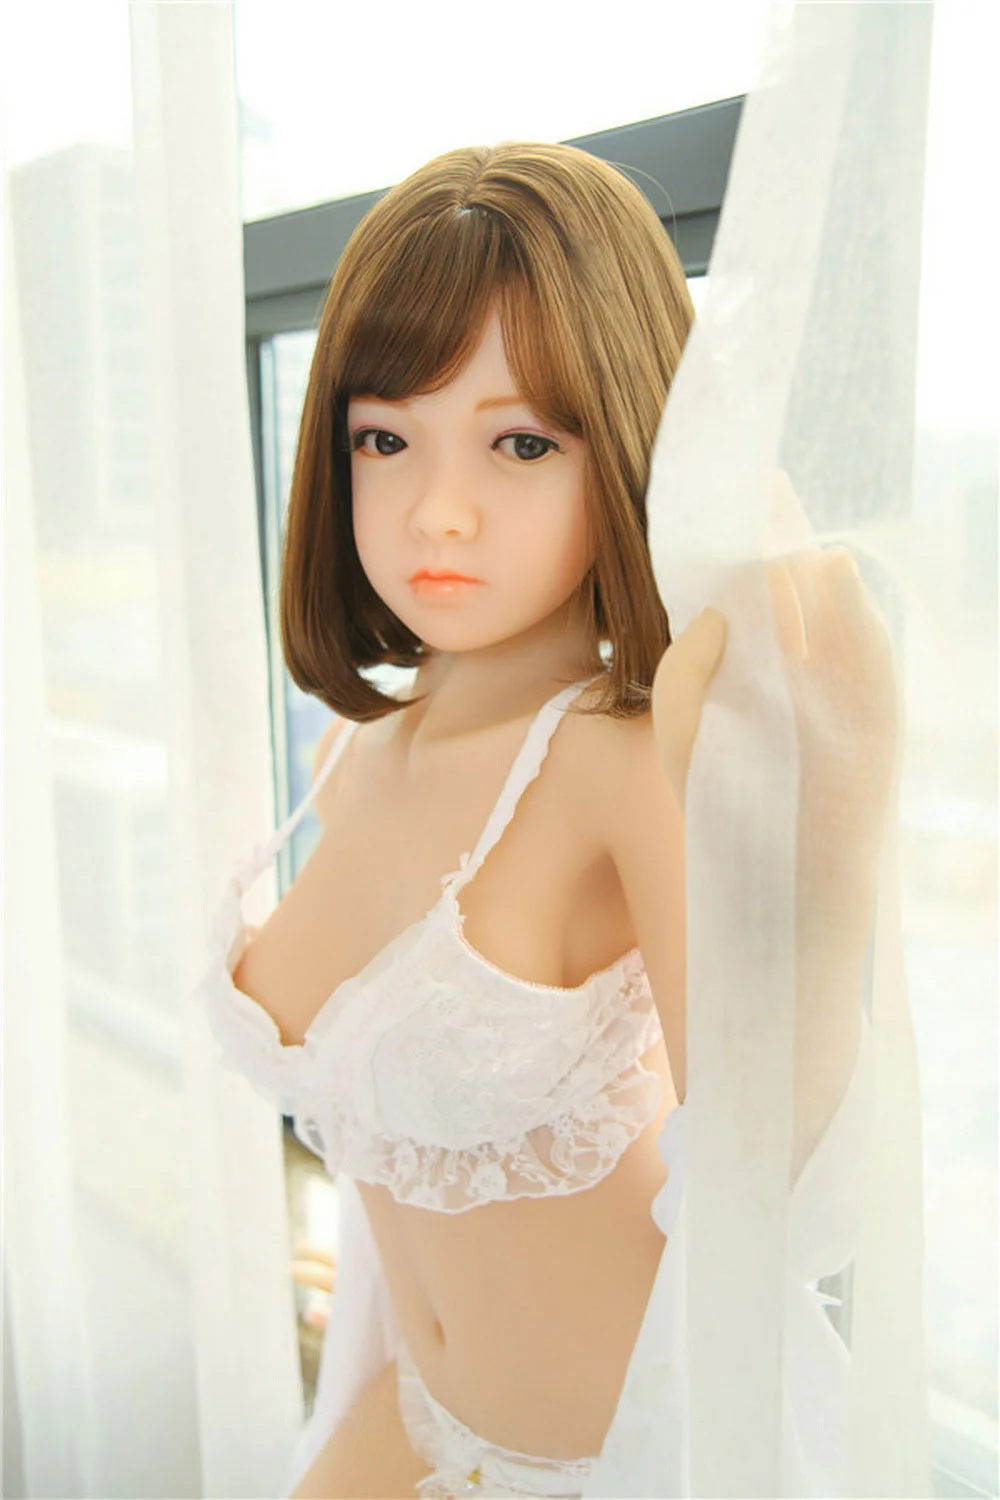 Sex doll with hand touching curtain